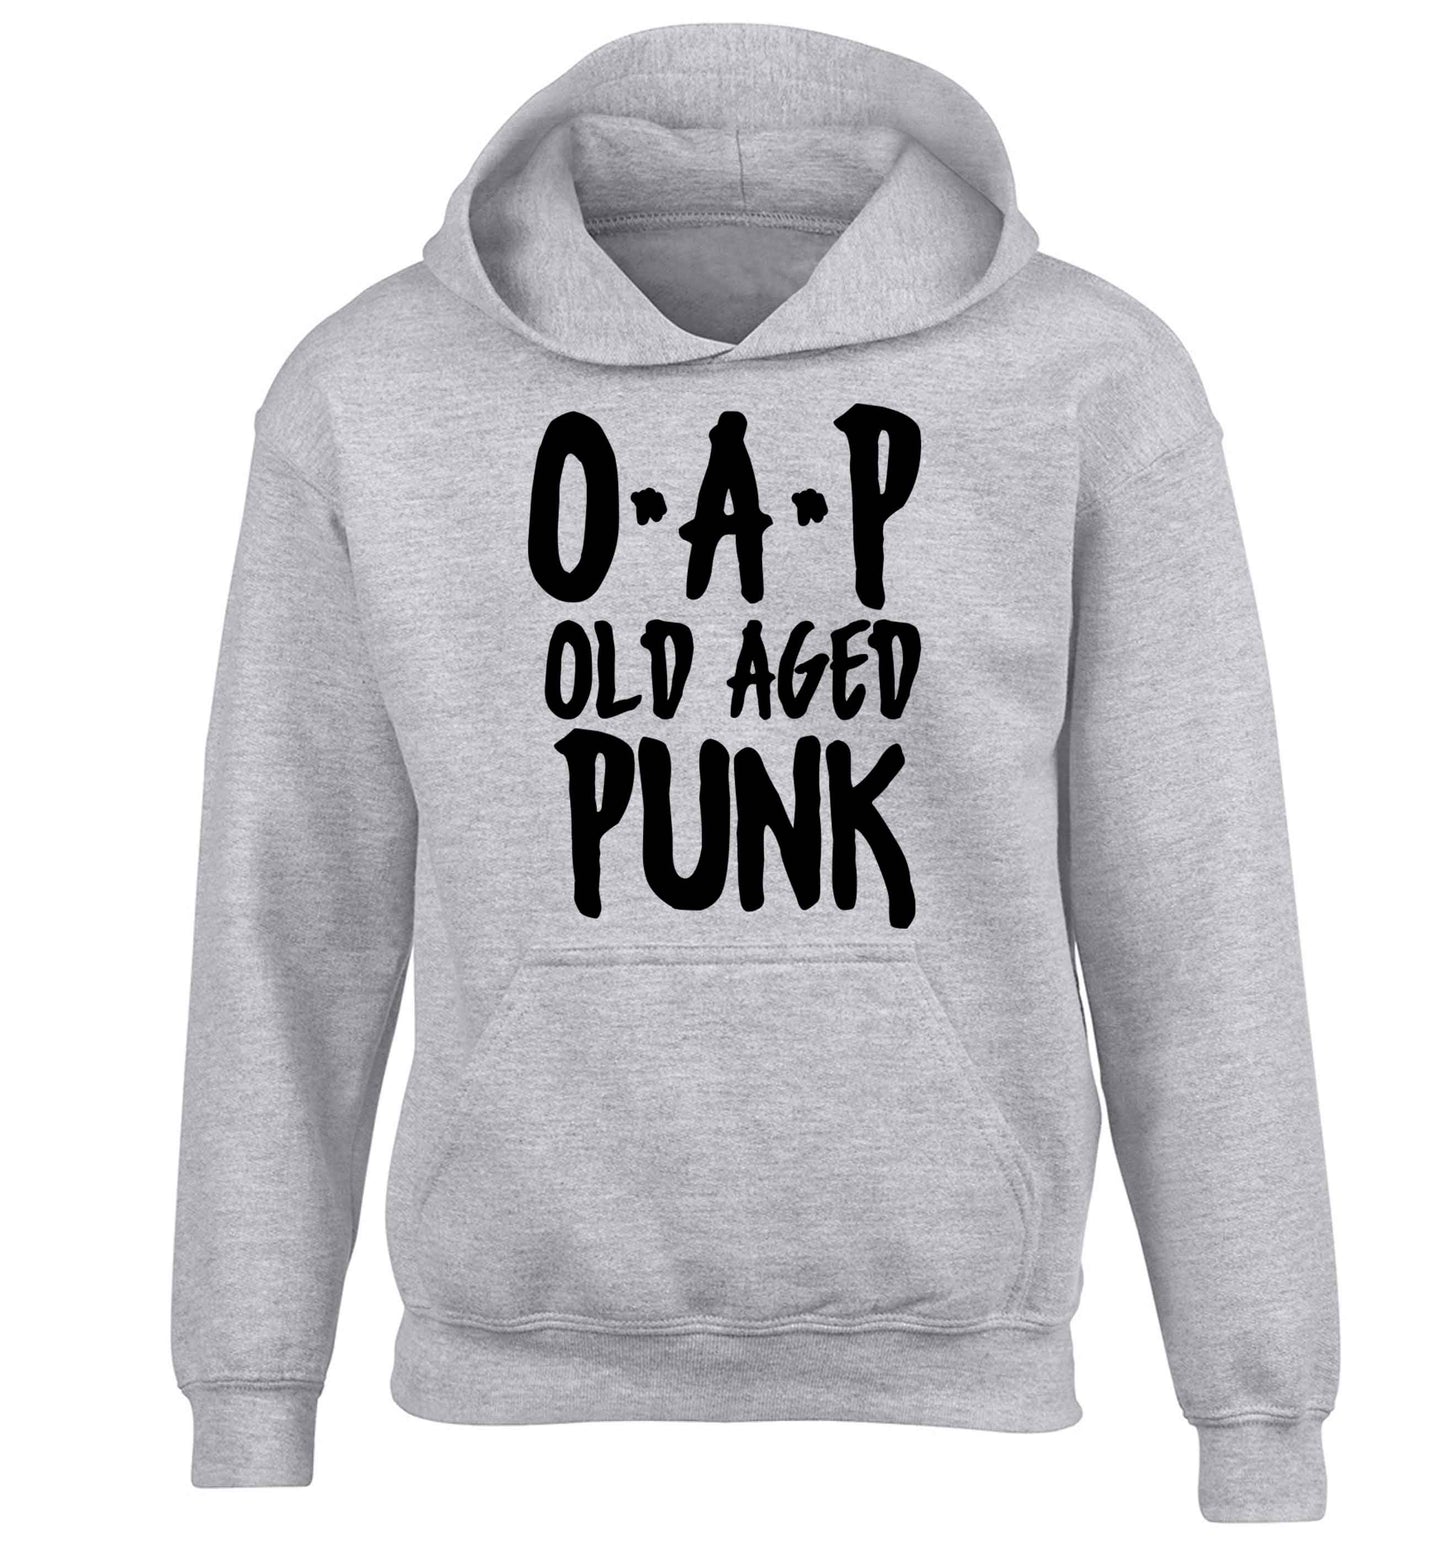 O.A.P Old Age Punk children's grey hoodie 12-13 Years